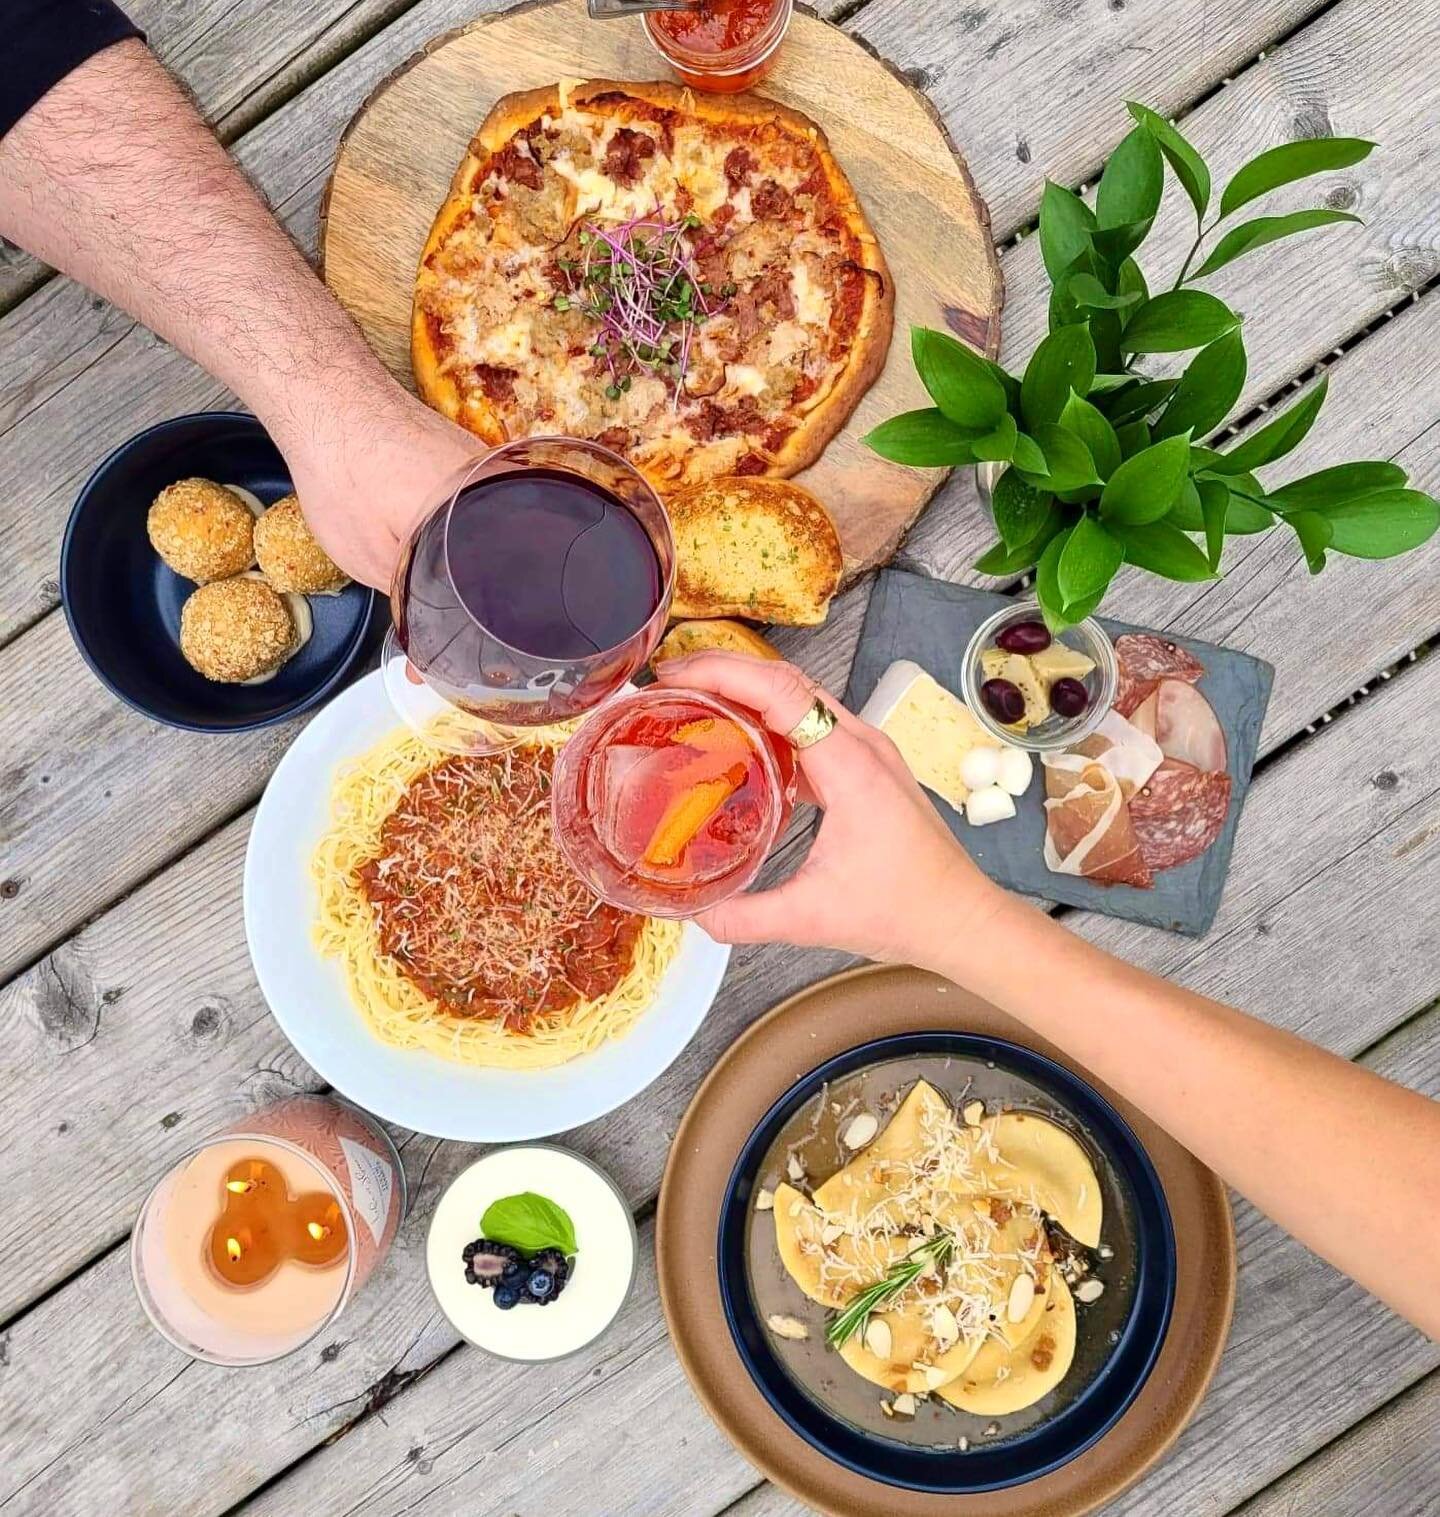 🍝 TAKE OUT &gt; &ldquo;Friday Night Italian Feast&rdquo; MAY 14th pick up 3PM &ndash; 8PM 

&ldquo;A sure way for a great Friday night (aka &lsquo;Buona Sera&rsquo;) - Grab your favorite wine, throw on &ldquo;Italian Cooking Music&rdquo; playlist on